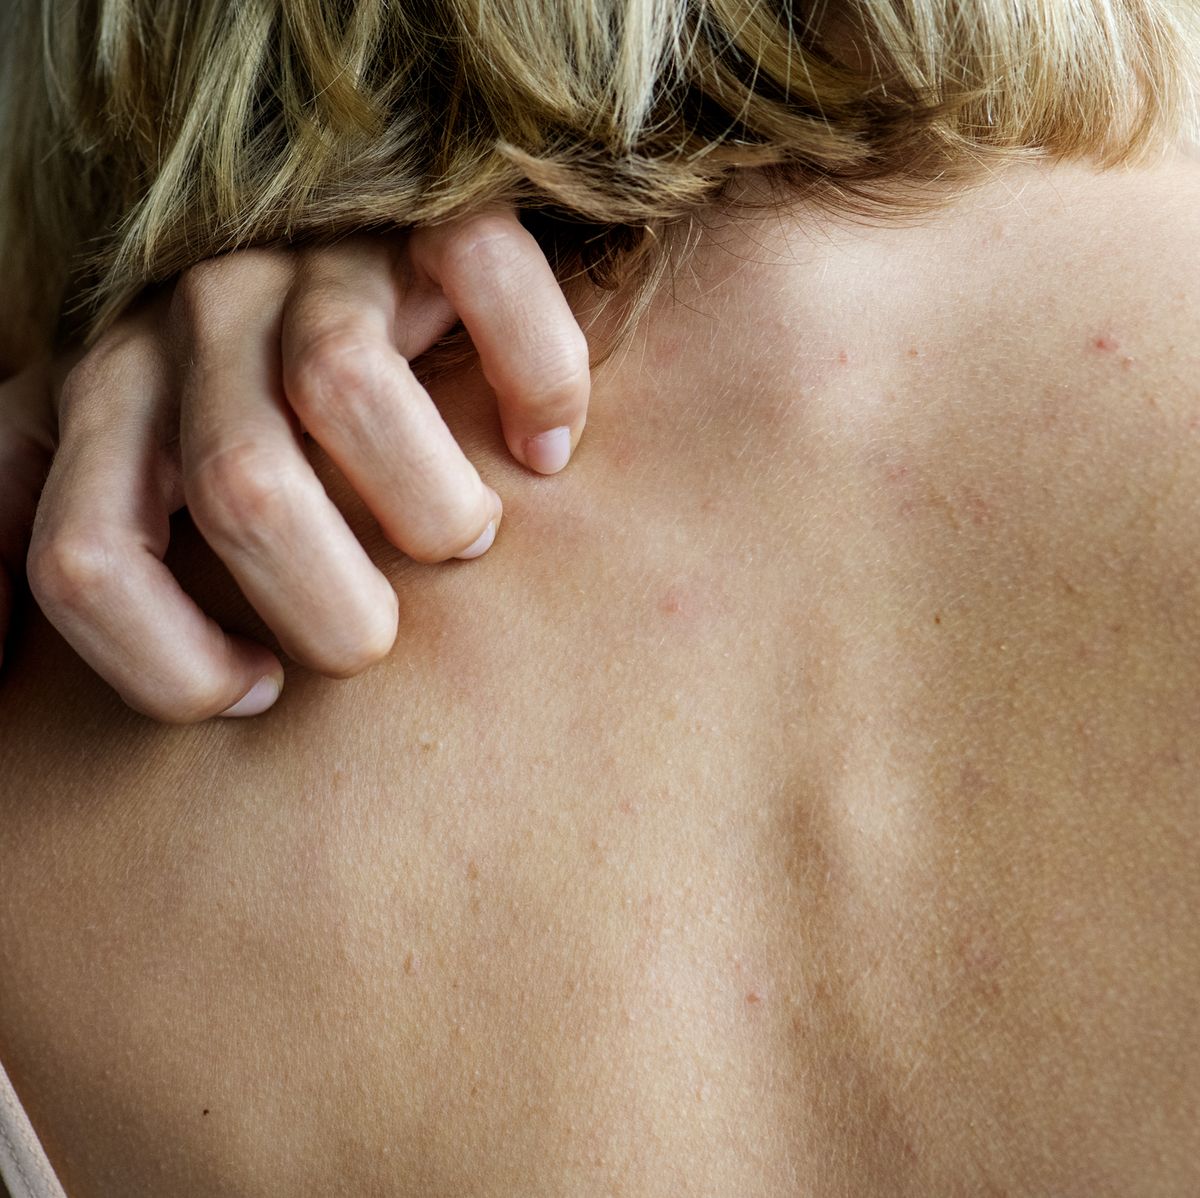 Itchy skin: 14 causes, pictures and treatments